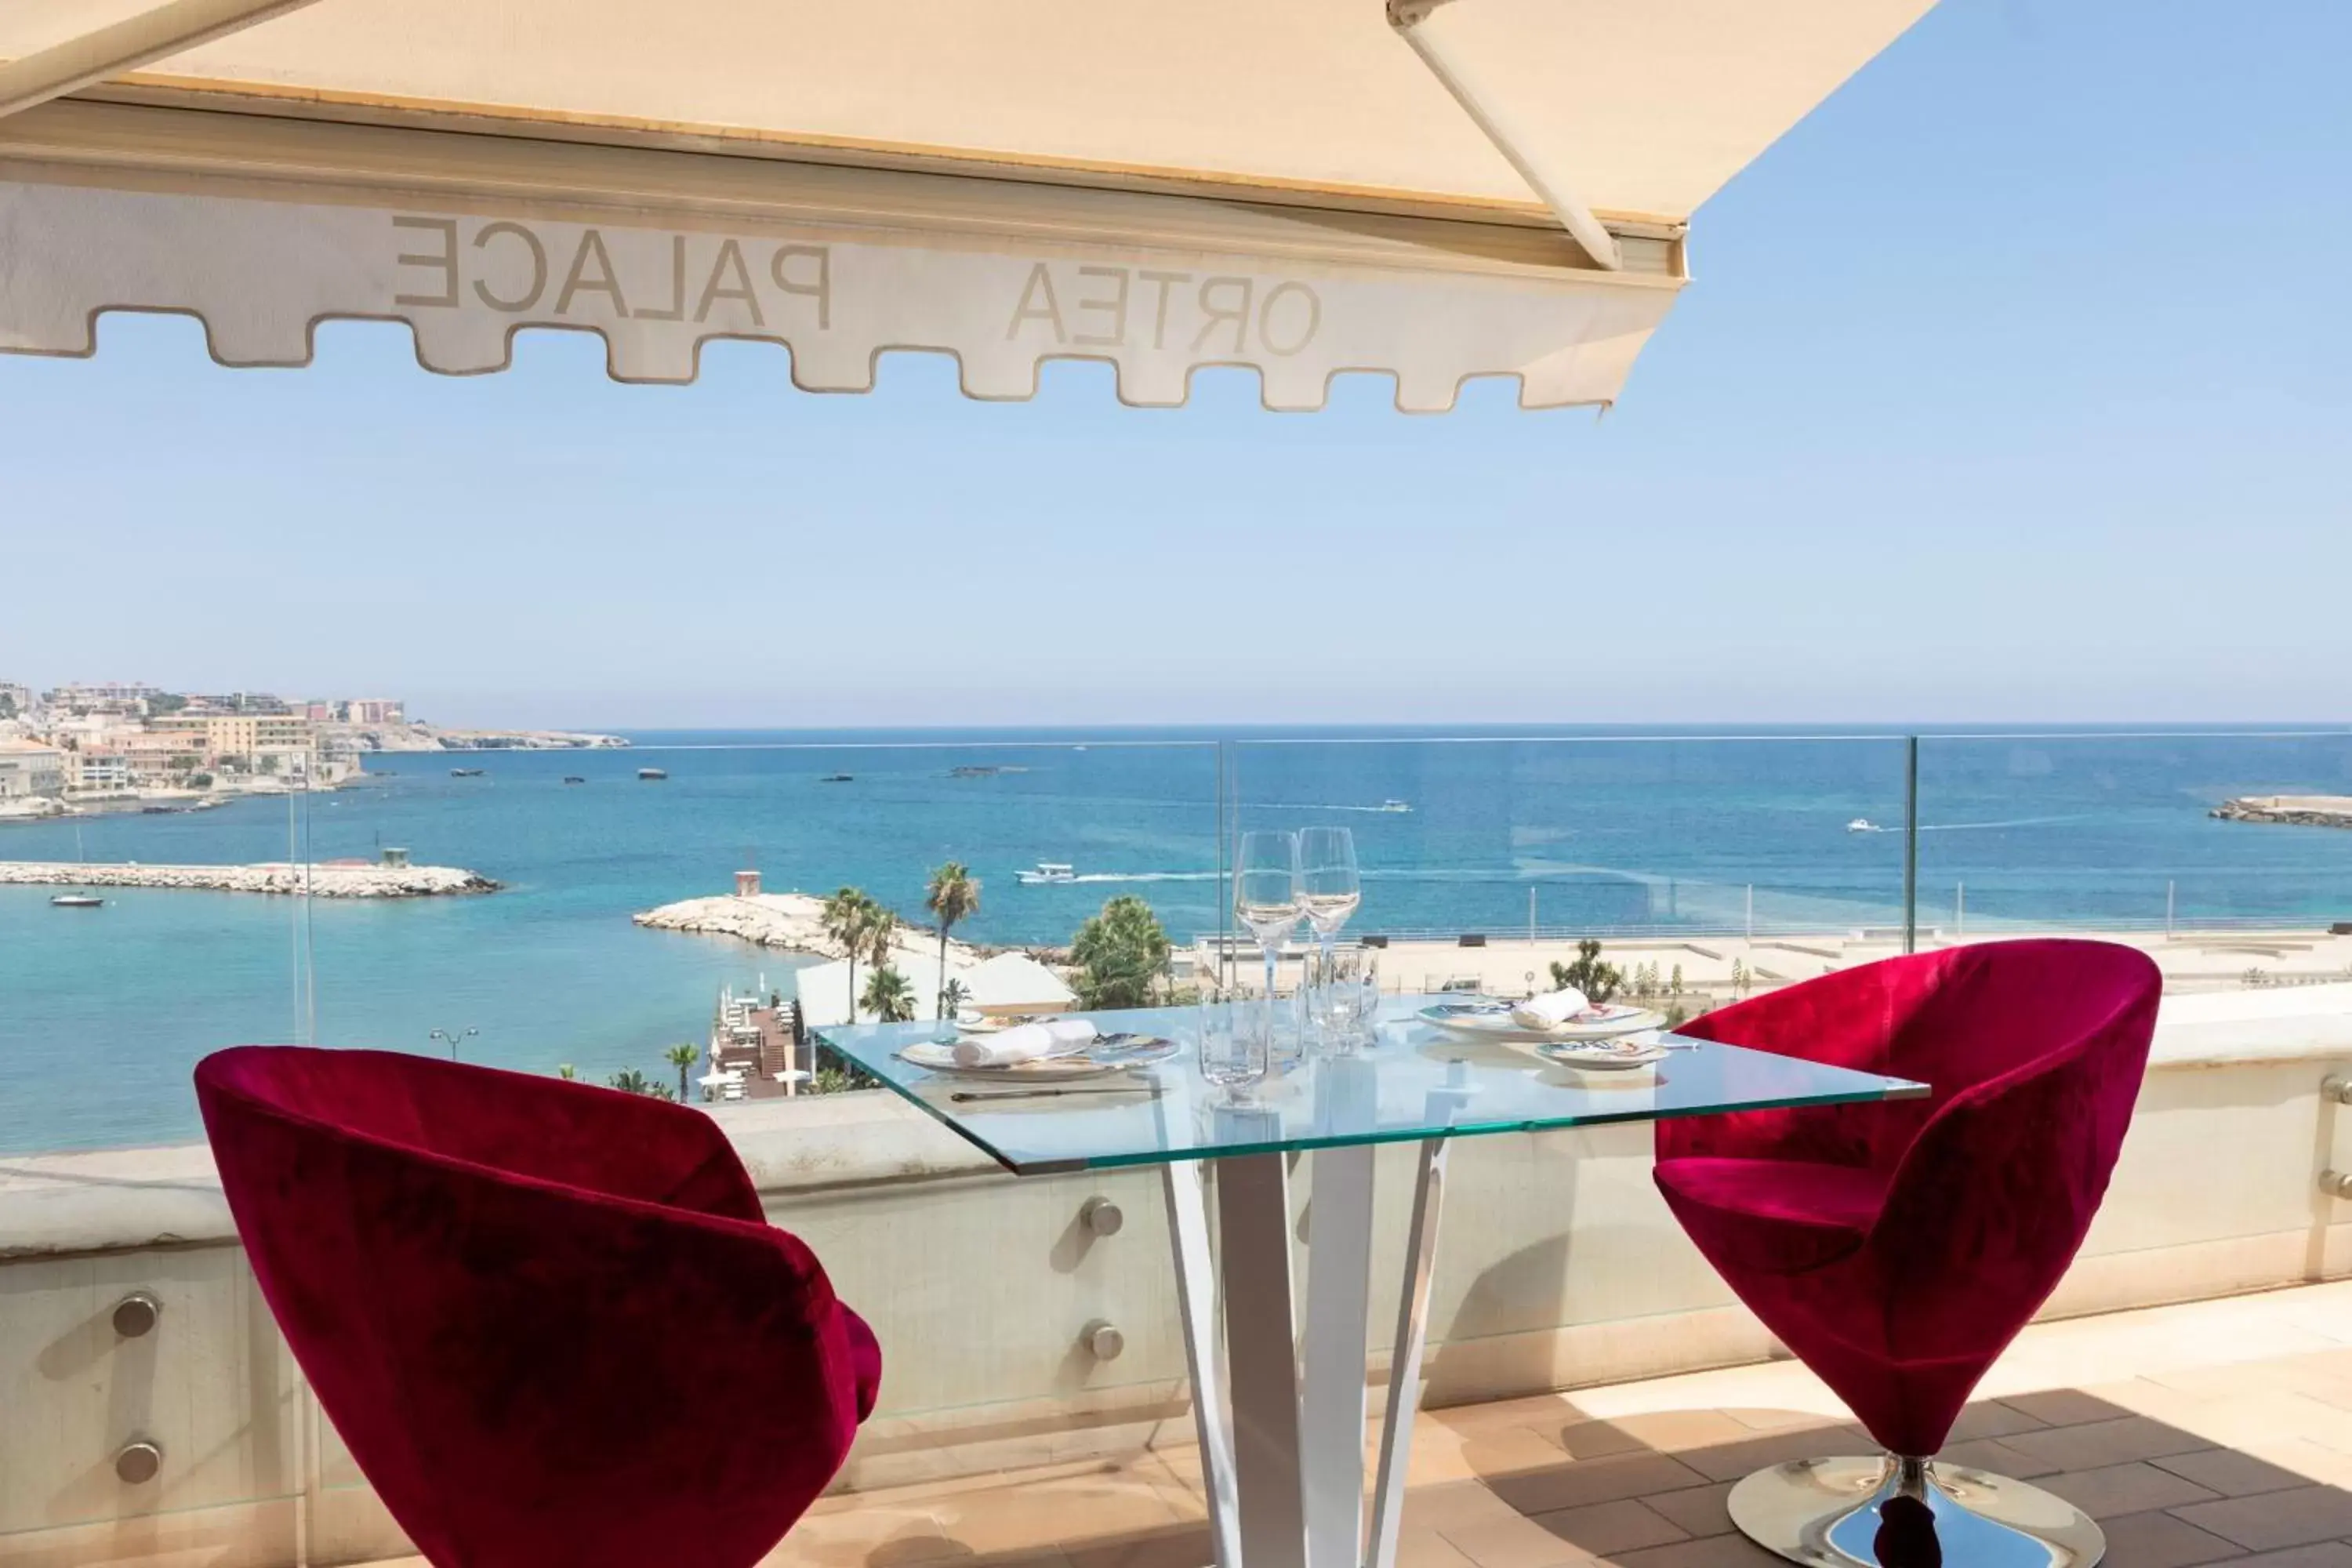 Restaurant/places to eat in Ortea Palace Hotel, Sicily, Autograph Collection